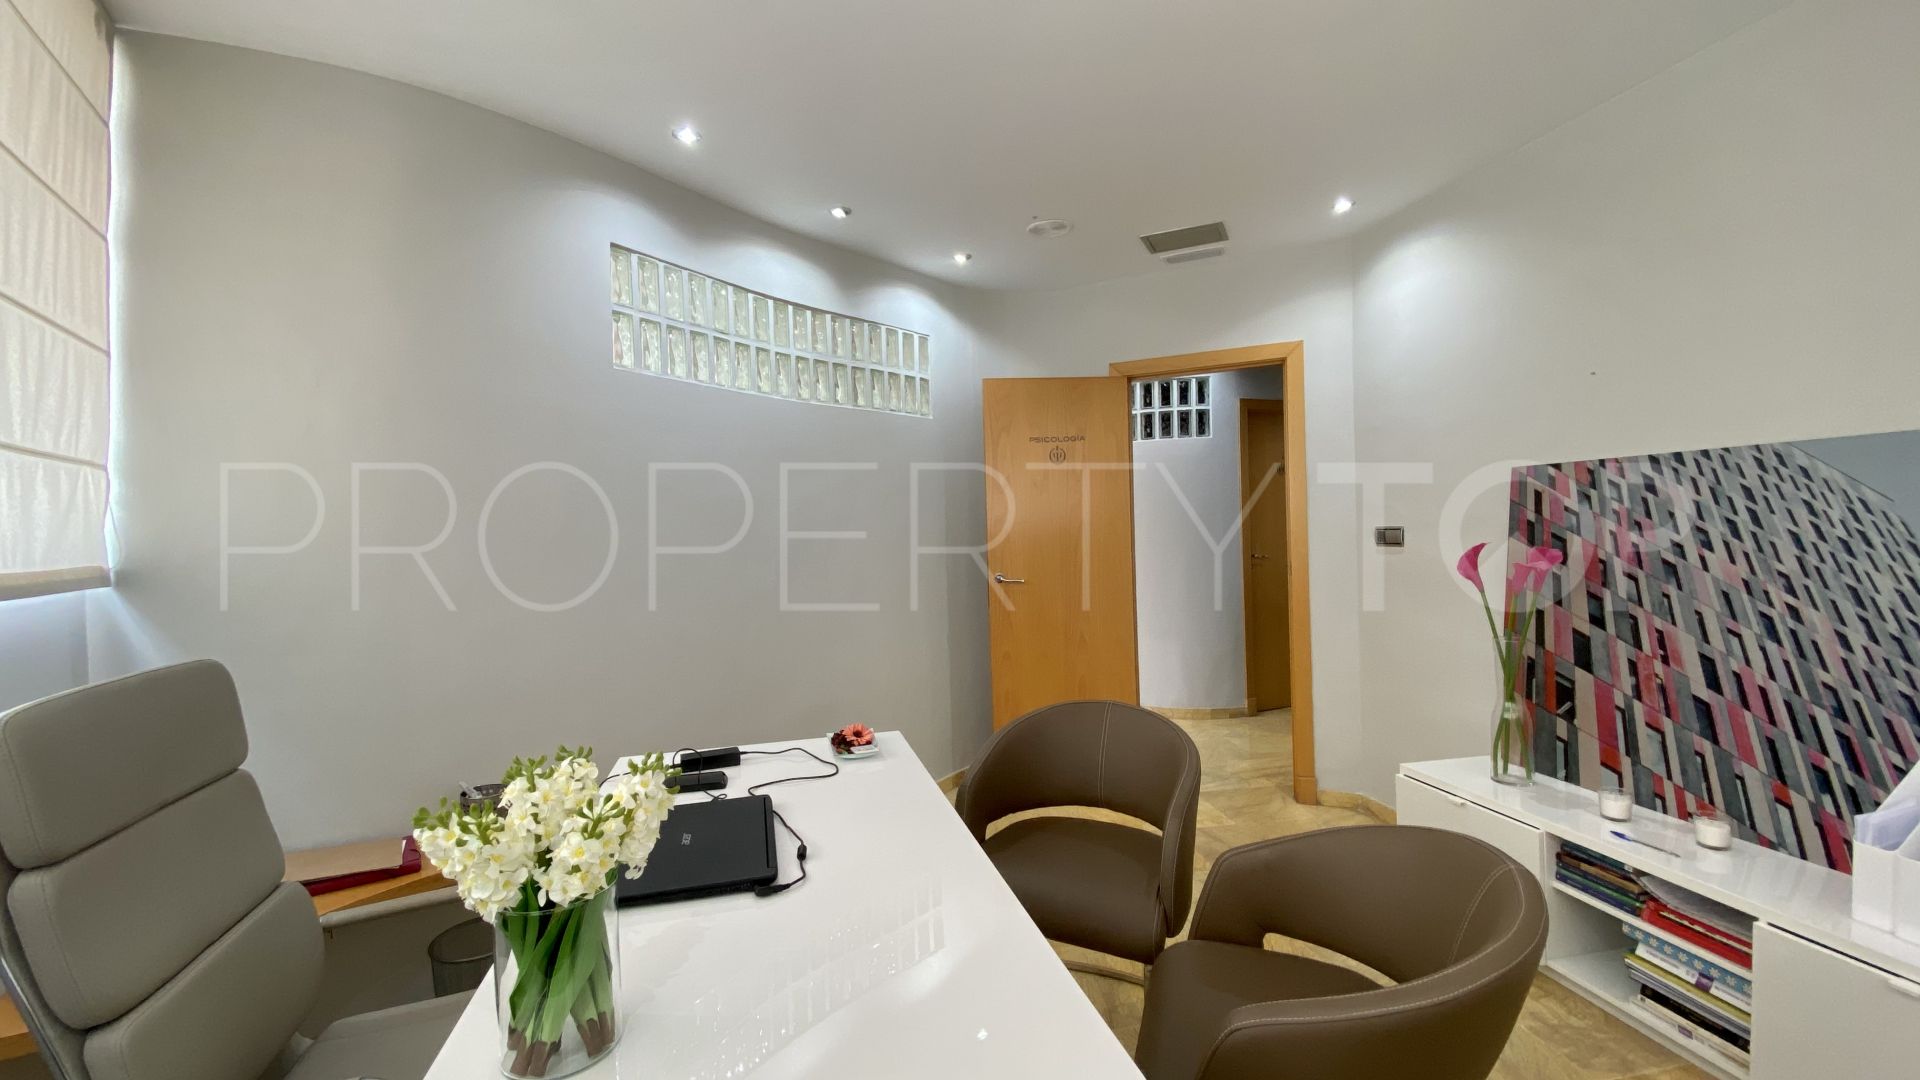 For sale business in Marbella City with 6 bedrooms